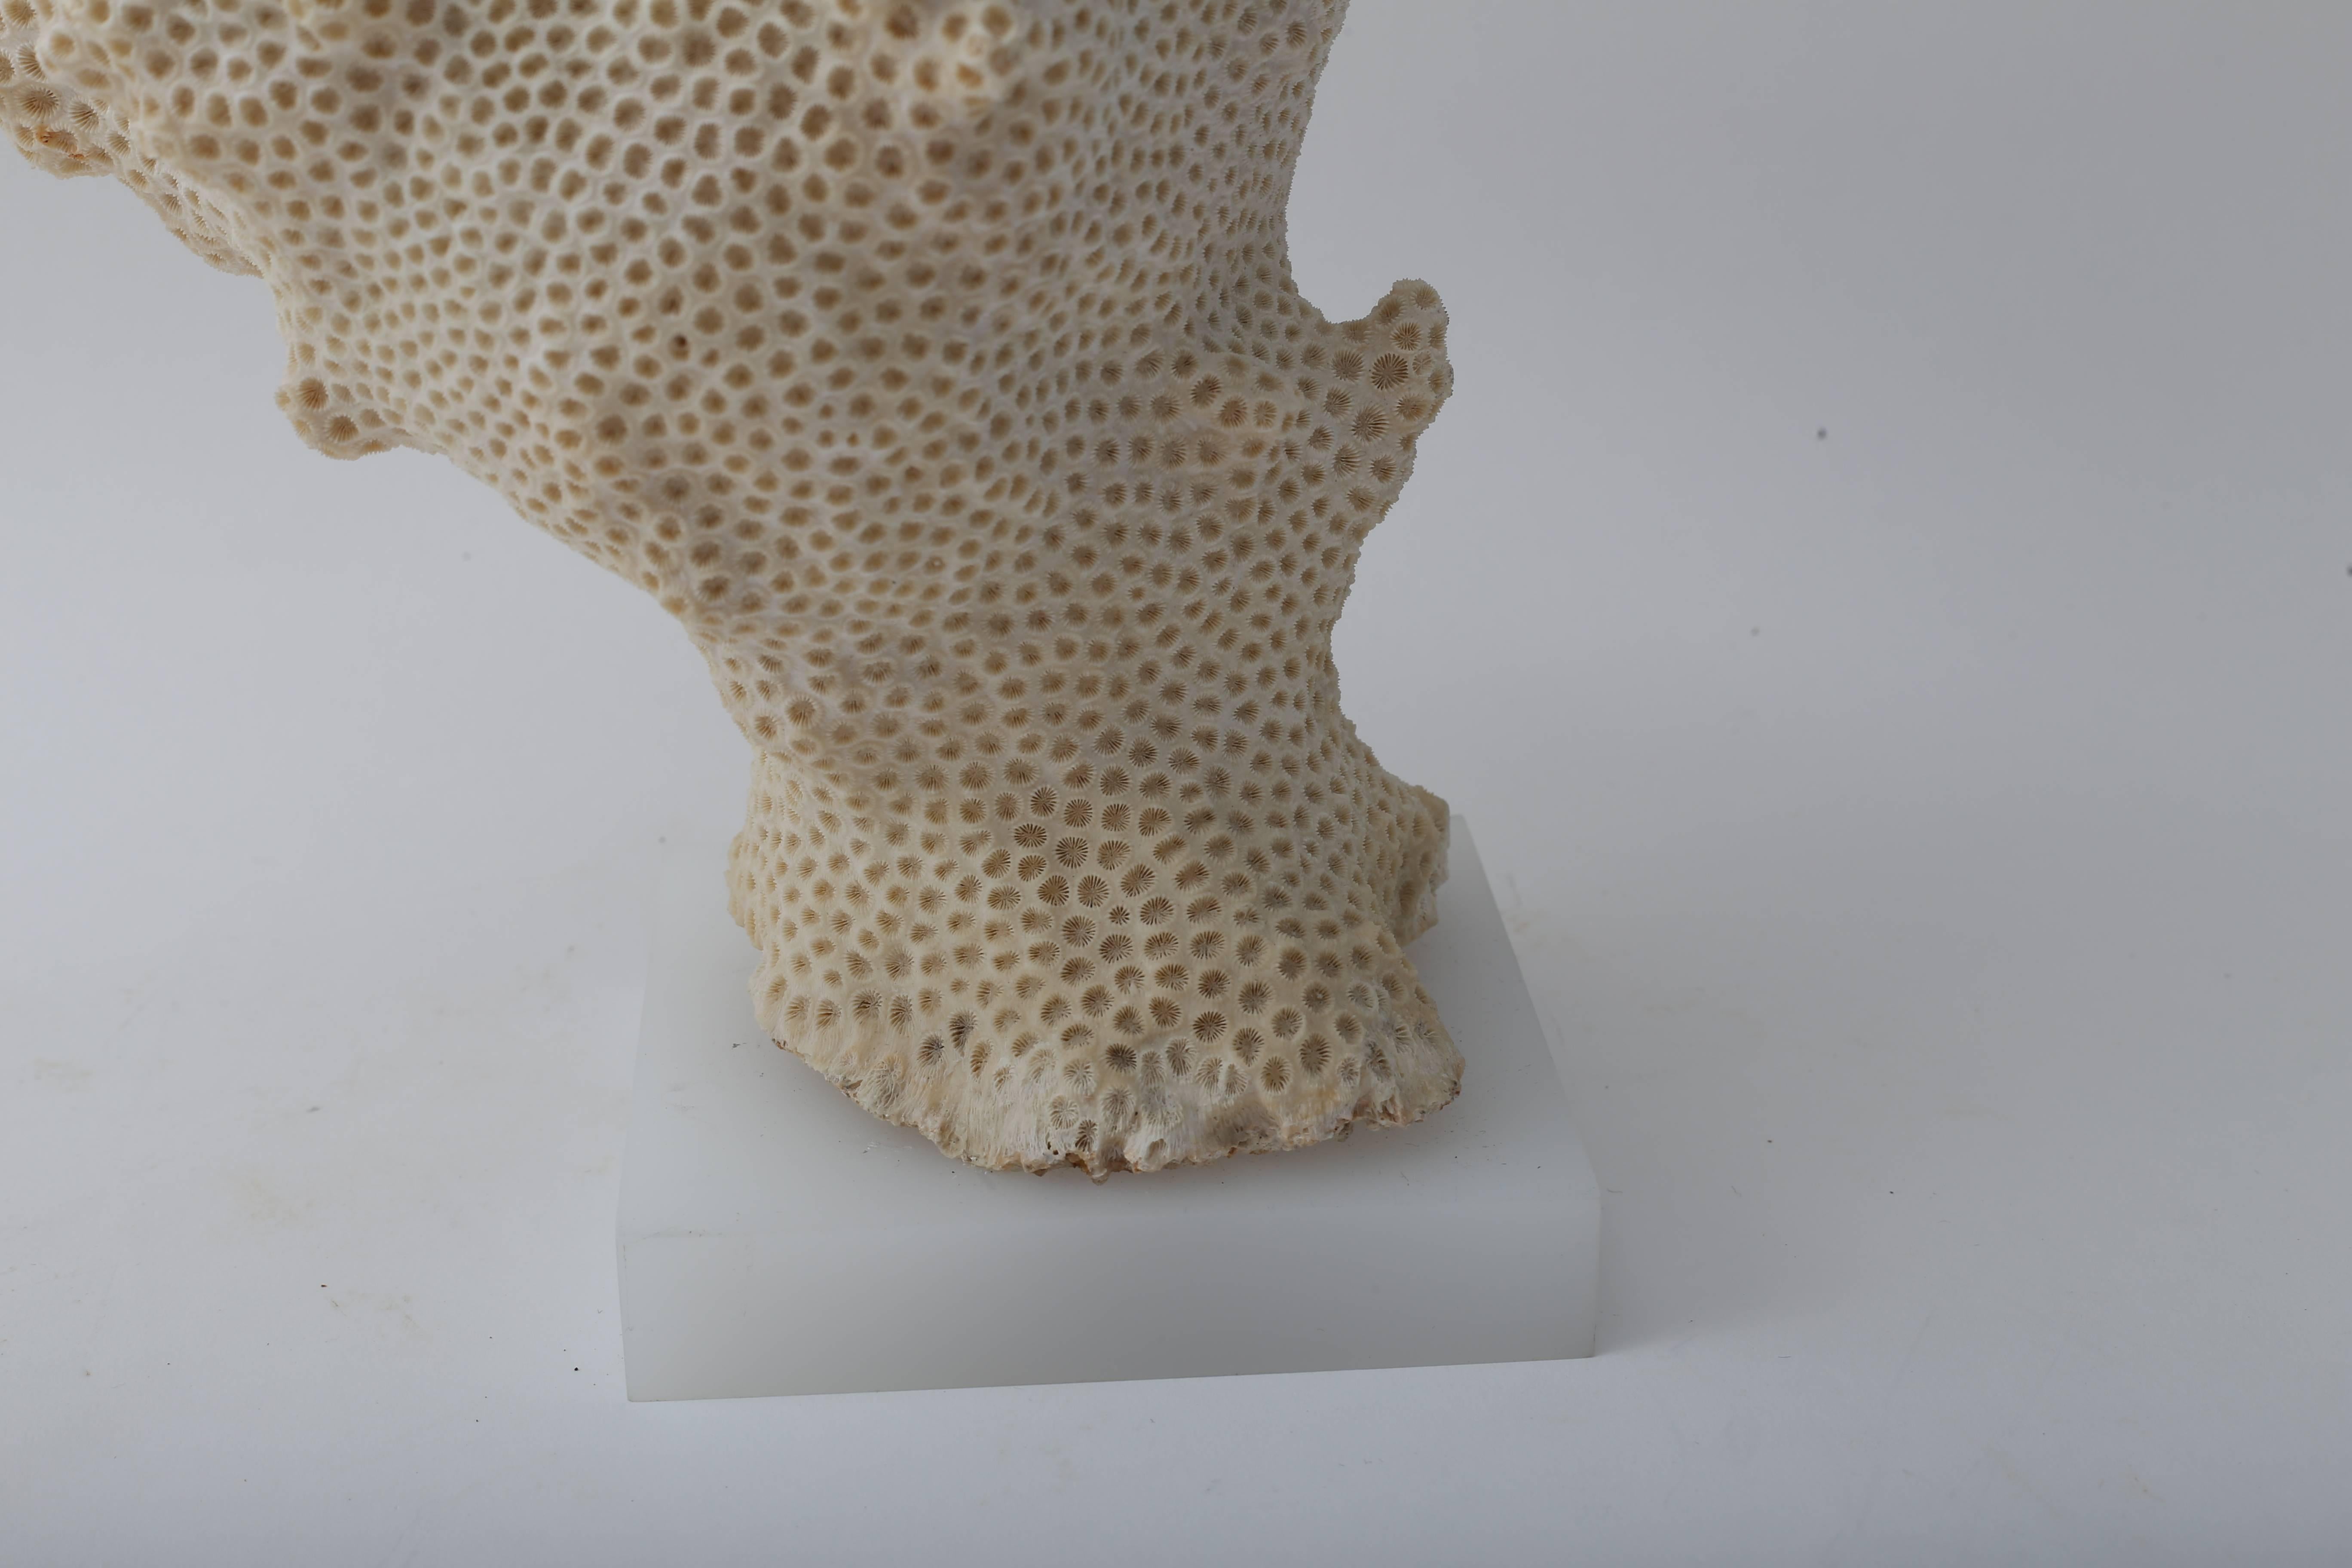 This piece of natural coral takes on the form of a conch shell and is mounted on a solid white Lucite base and dates to the 1970s.